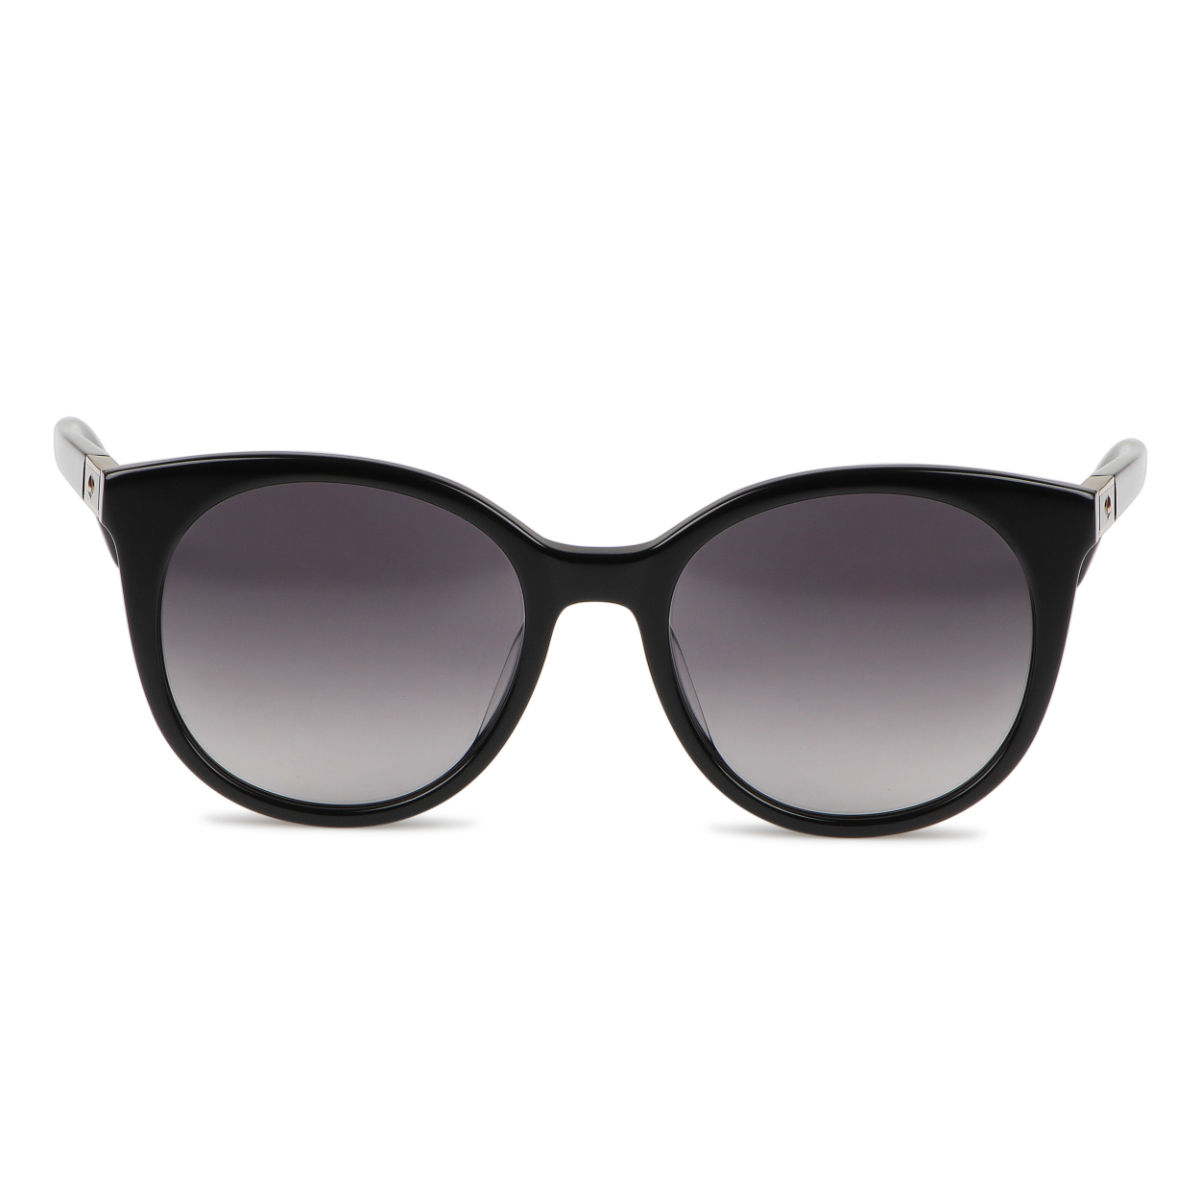 Kate Spade AKAYLA/S 807 52 9O Woman Round/Oval Sunglass: Buy Kate Spade  AKAYLA/S 807 52 9O Woman Round/Oval Sunglass Online at Best Price in India  | Nykaa